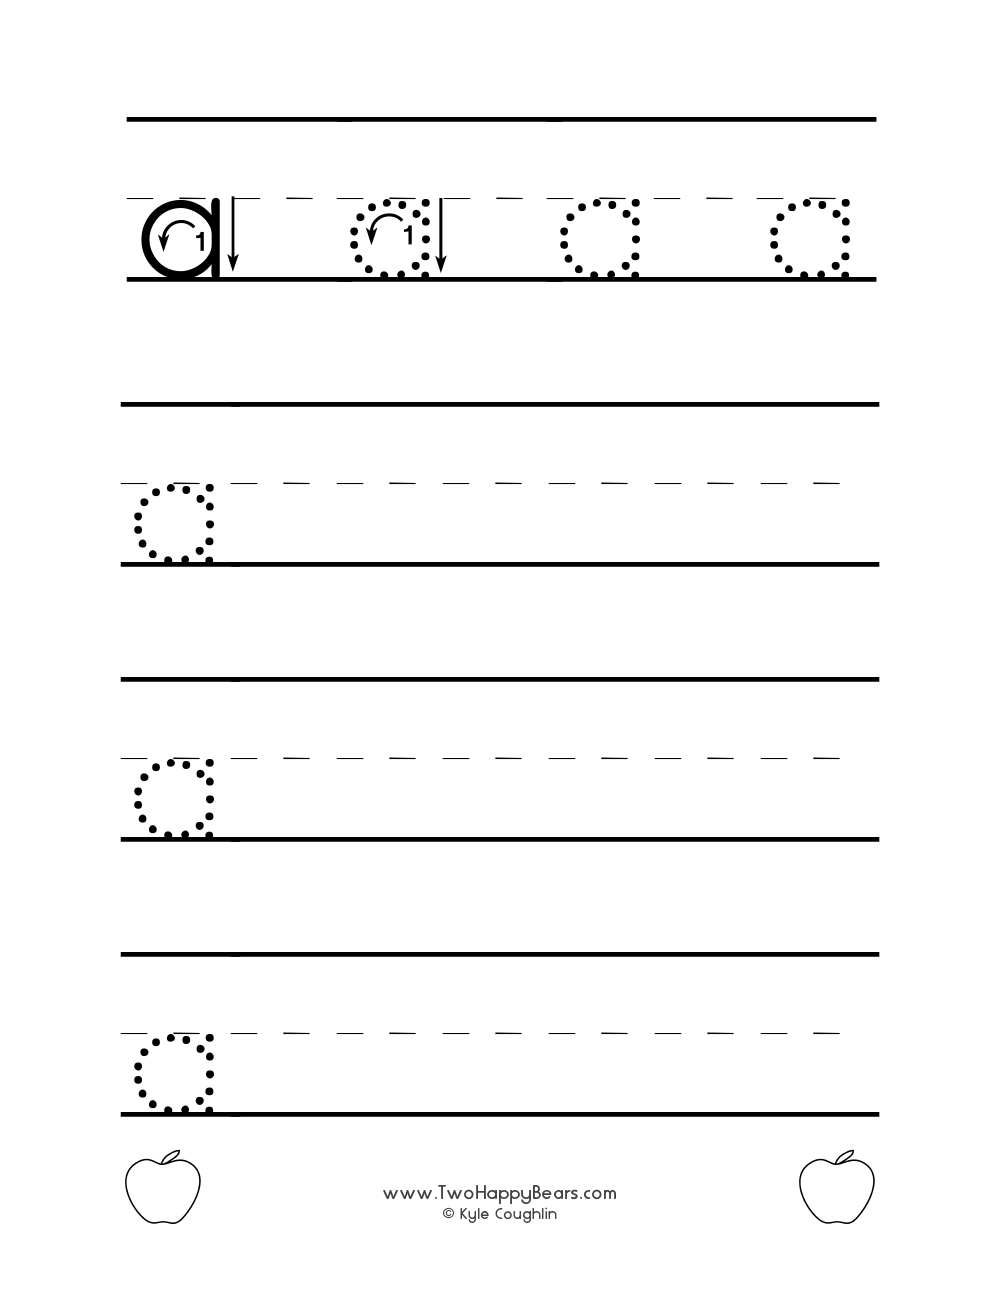 Worksheet for tracing and writing the lowercase letter A, in free printable PDF format.